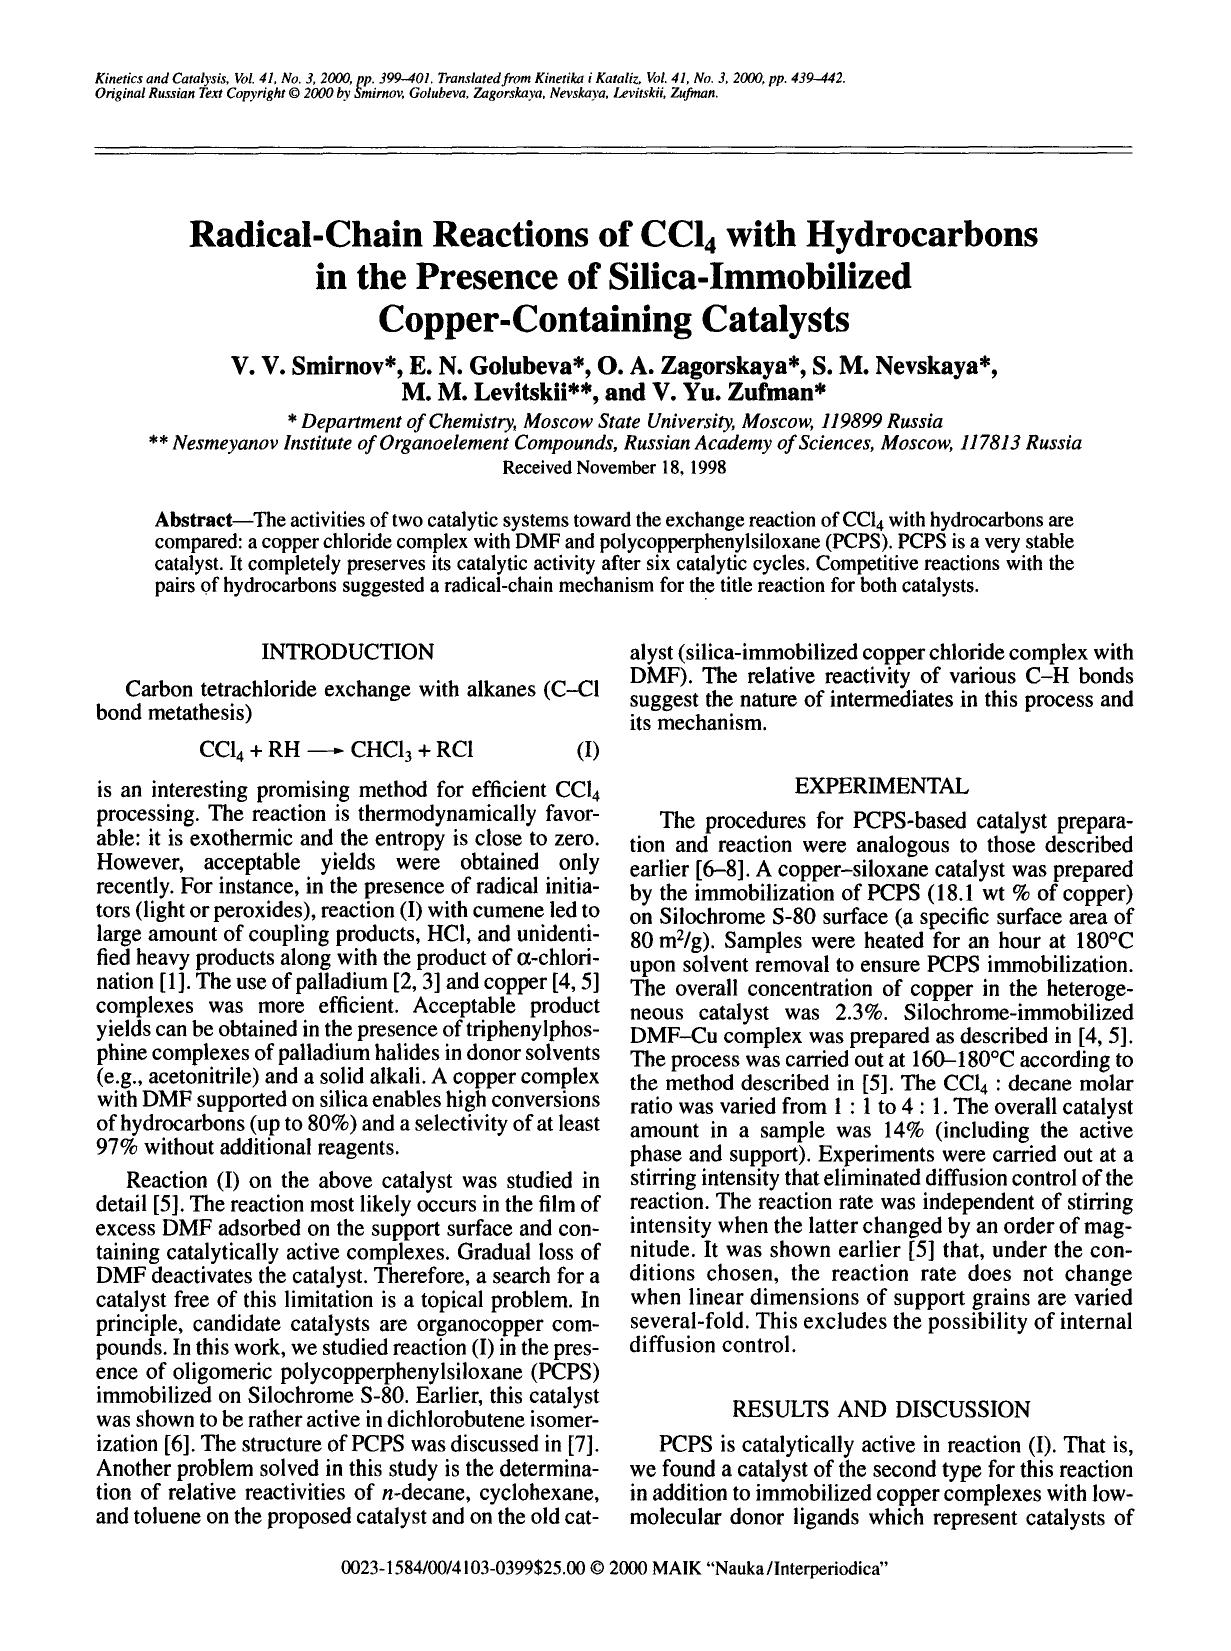 Radical-chain reactions of CCl<Subscript>4<Subscript> with hydrocarbons in the presence of silica-immobilized copper-containing catalysts by Unknown